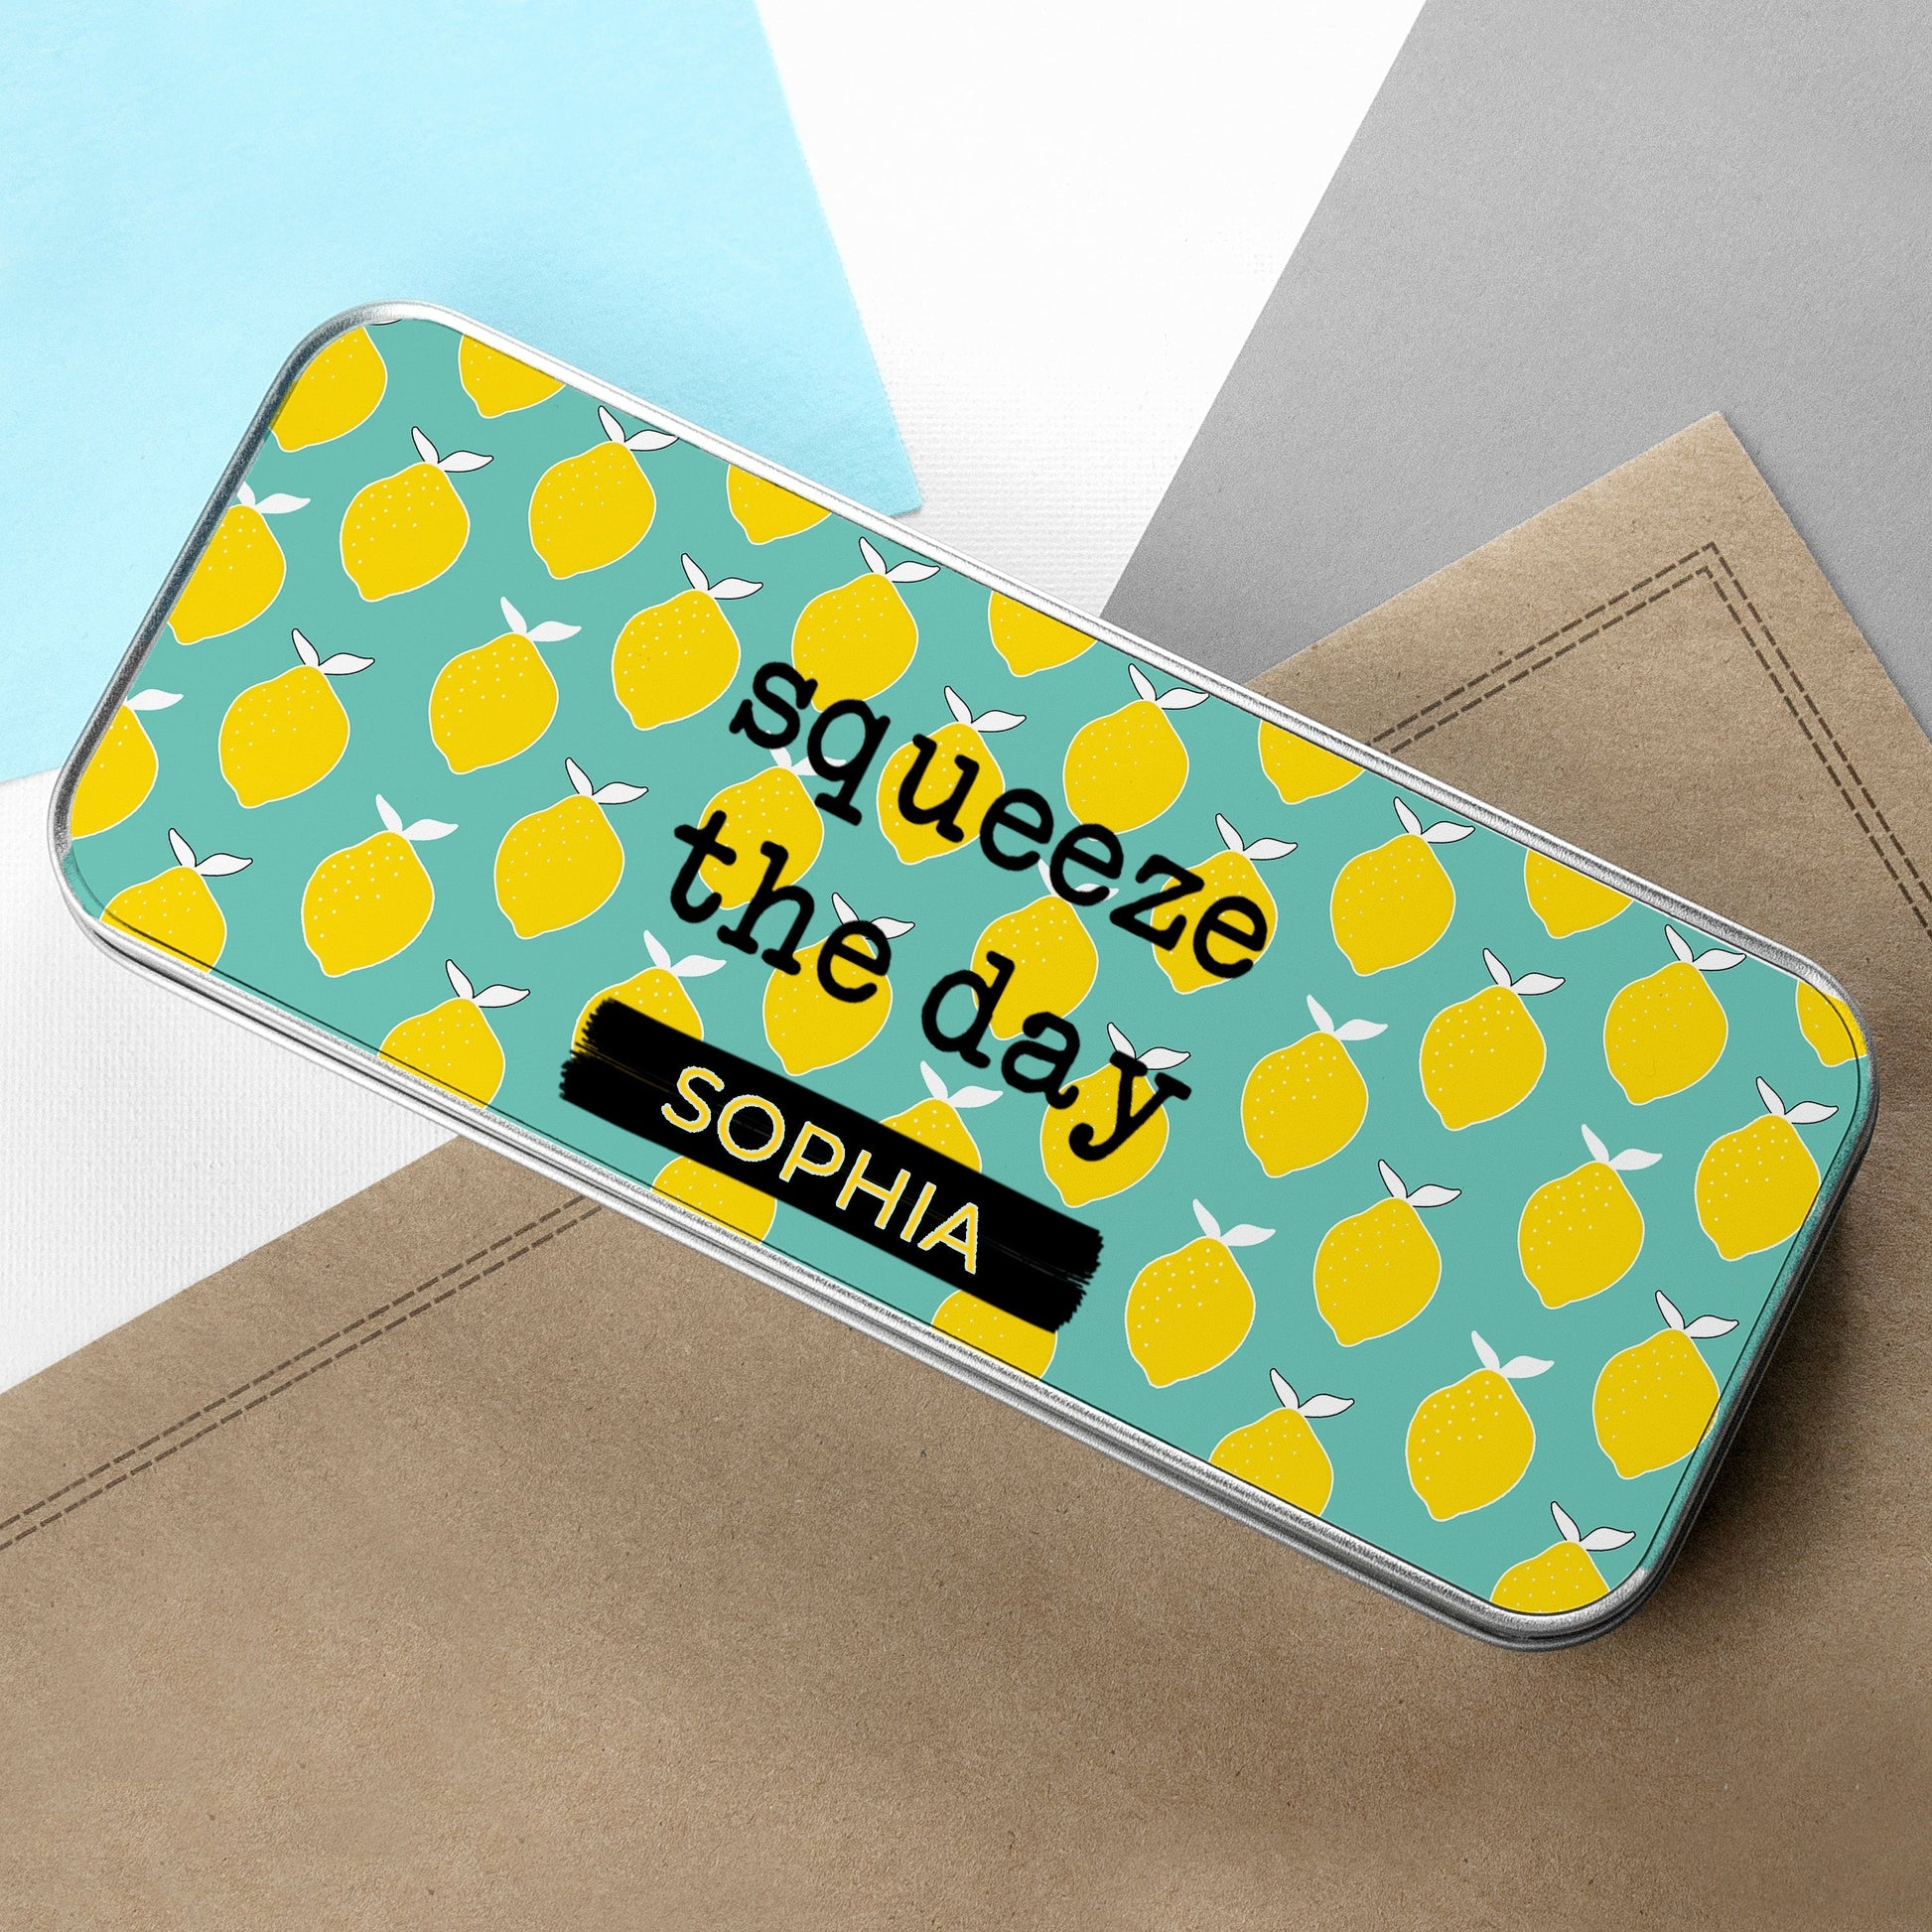 Personalized Pencil Cases - Squeeze The Day Pencil Case 